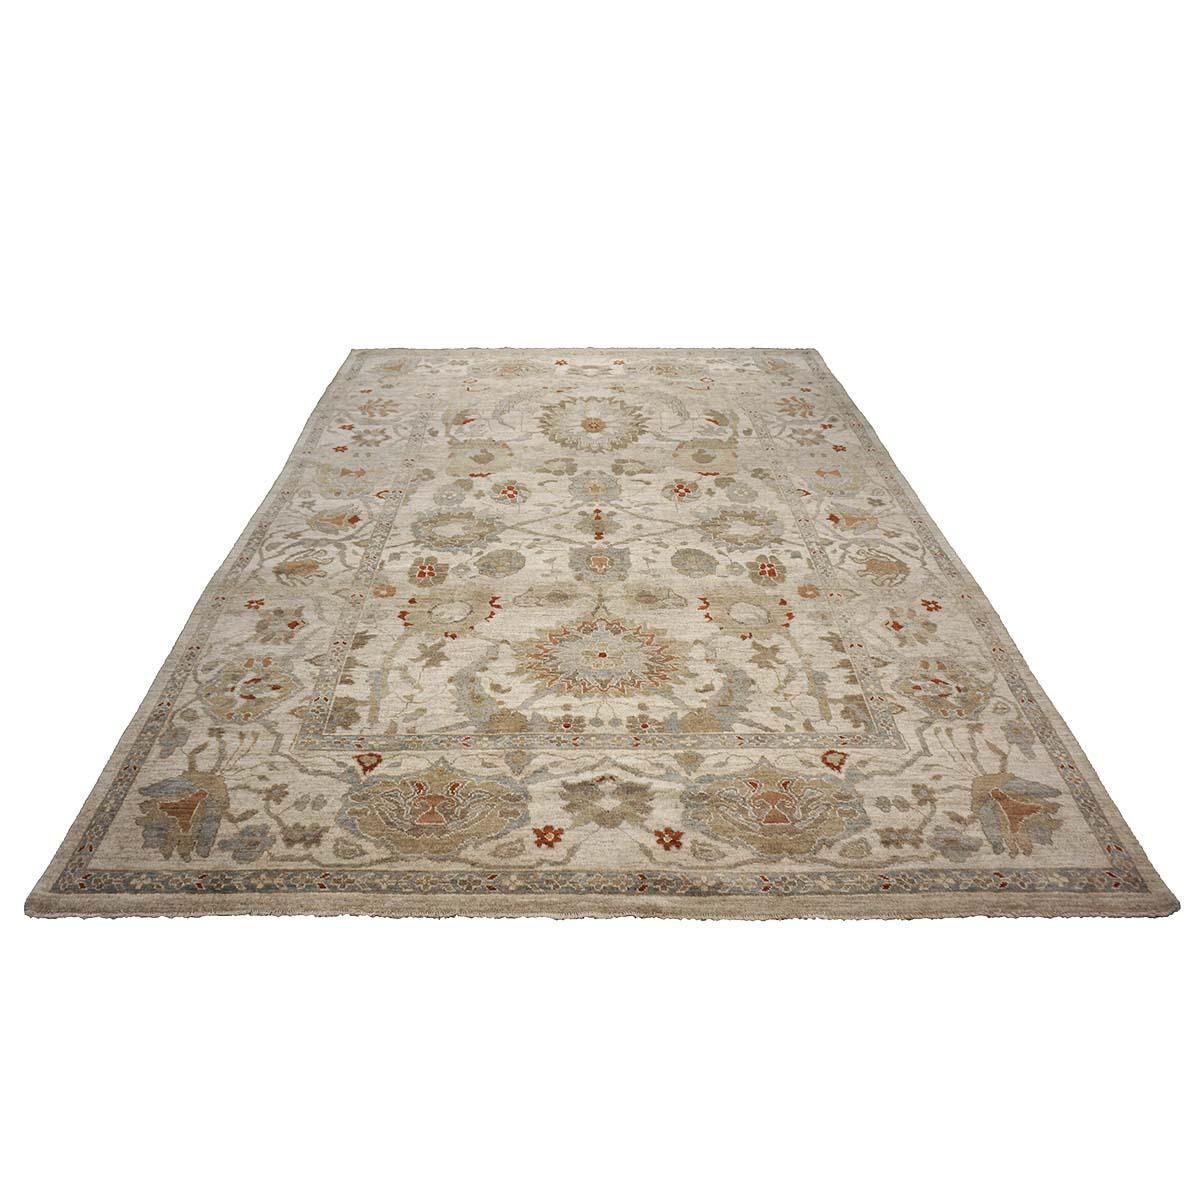 Ashly Fine Rugs presents an antique recreation of an original Persian Sultanabad area rug. Part of our own previous production, this antique recreation was thought of and created in-house and 100% handmade in Iran by master weavers. Persian